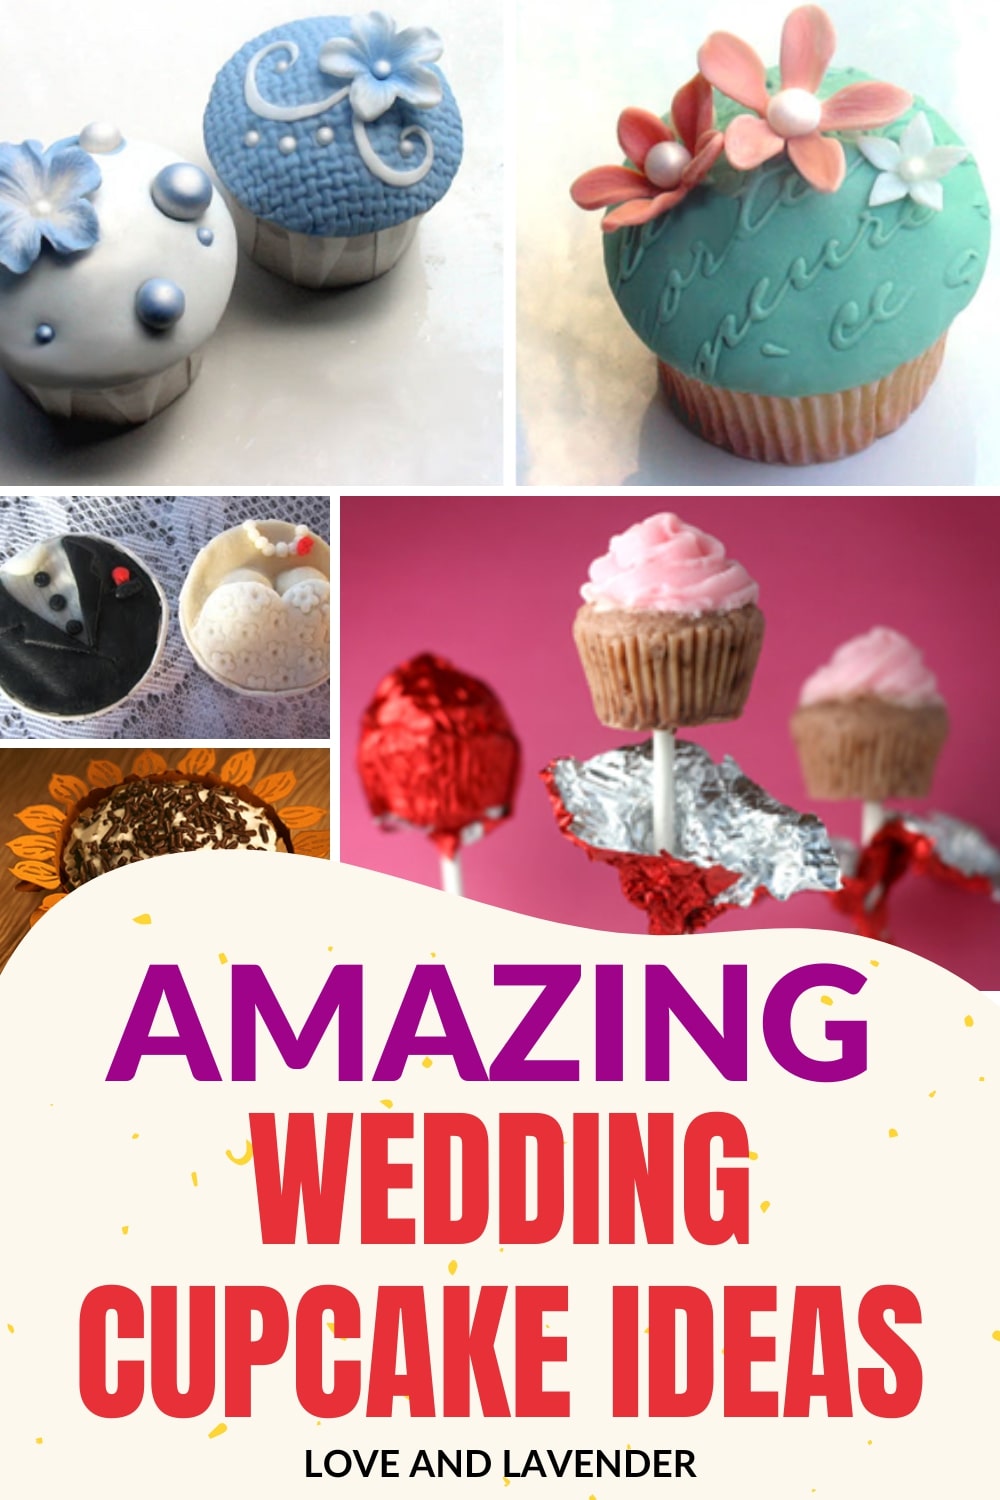 Wedding cupcakes are a delicious and fun alternative to the traditional wedding cake. Visit the blog and check out these amazing ideas for your next event!